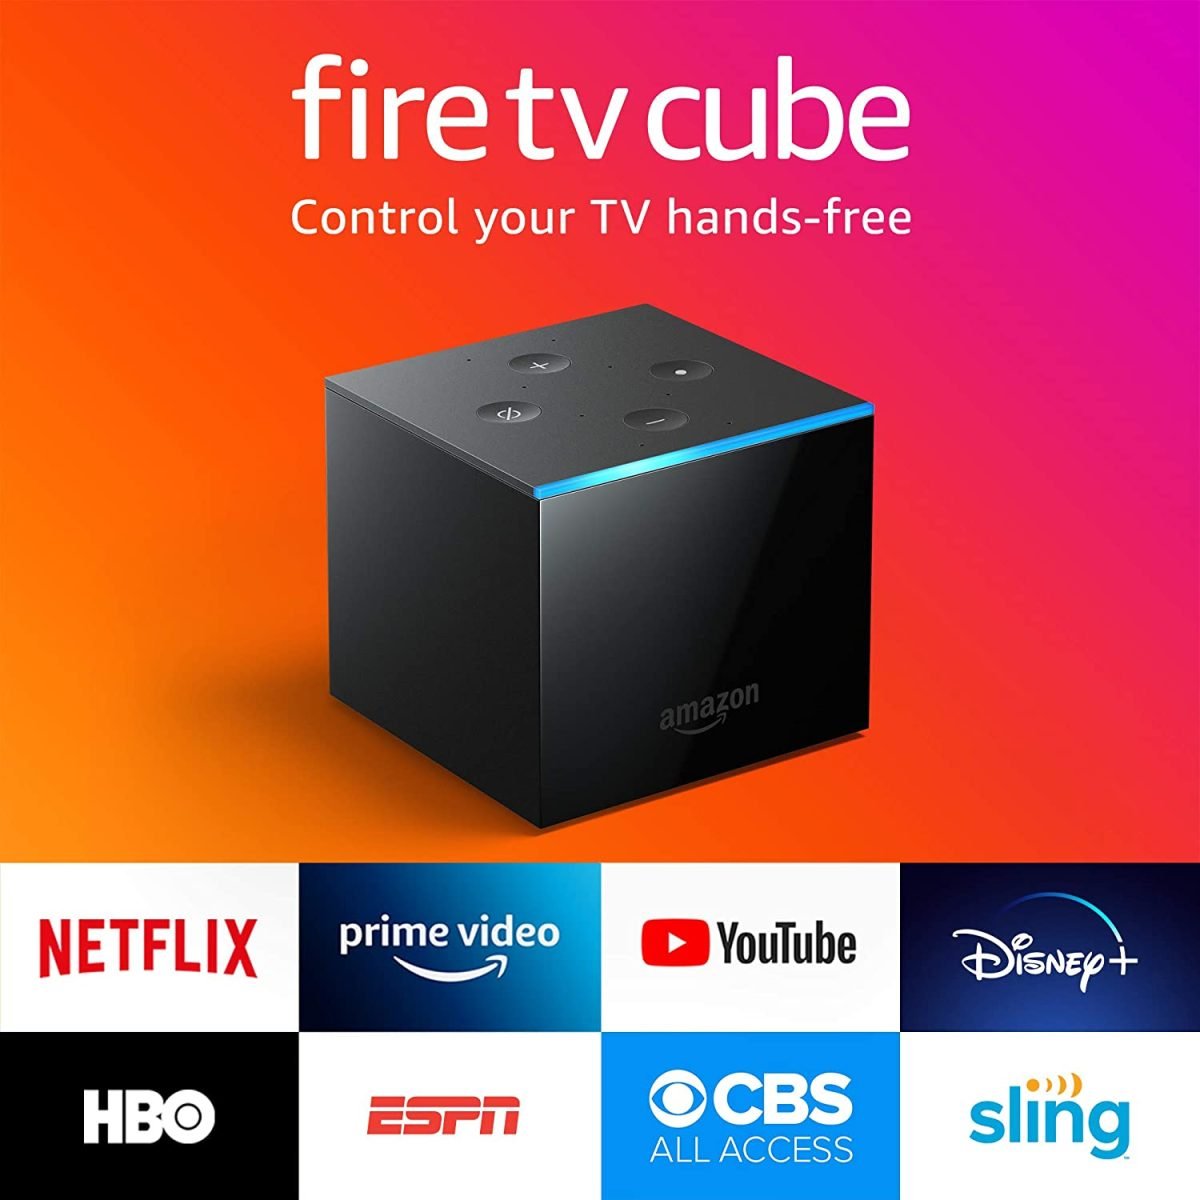 71C0Gcpgwdl. Ac Sl1500 Amazon &Lt;H1&Gt;Fire Tv Cube 4K Ultra Hd 2Nd Generation | Hands-Free With Alexa Built-In | Alexa Voice Remote 3Rd Gen Remote&Lt;/H1&Gt; &Lt;Ul Class=&Quot;A-Unordered-List A-Vertical A-Spacing-Mini&Quot;&Gt; &Lt;Li&Gt;&Lt;Span Class=&Quot;A-List-Item&Quot;&Gt;The Fastest, Most Powerful Fire Tv Streaming Device.&Lt;/Span&Gt;&Lt;/Li&Gt; &Lt;Li&Gt;&Lt;Span Class=&Quot;A-List-Item&Quot;&Gt;From Across The Room, Just Ask Alexa To Turn On The Tv, Dim The Lights, And Play Your Show.&Lt;/Span&Gt;&Lt;/Li&Gt; &Lt;Li&Gt;&Lt;Span Class=&Quot;A-List-Item&Quot;&Gt;Control Compatible Soundbar And A/V Receiver, And Change Live Cable Or Satellite Channels With Your Voice.&Lt;/Span&Gt;&Lt;/Li&Gt; &Lt;Li&Gt;&Lt;Span Class=&Quot;A-List-Item&Quot;&Gt;With The Built-In Speaker, Ask Alexa To Check The Weather, Turn Off The Lights, And More – Even When The Tv Is Off.&Lt;/Span&Gt;&Lt;/Li&Gt; &Lt;Li&Gt;&Lt;Span Class=&Quot;A-List-Item&Quot;&Gt;Instant Access To 4K Ultra Hd Content, Plus Support For Dolby Vision And Hdr, Hdr10+.&Lt;/Span&Gt;&Lt;/Li&Gt; &Lt;Li&Gt;&Lt;Span Class=&Quot;A-List-Item&Quot;&Gt;Watch Favorites From Netflix, Youtube, Prime Video, Disney+, Apple Tv+, Hbo Max, And More. Stream For Free With Pluto Tv, Imdb Tv, And More.&Lt;/Span&Gt;&Lt;/Li&Gt; &Lt;Li&Gt;&Lt;Span Class=&Quot;A-List-Item&Quot;&Gt;Designed To Protect Your Privacy - Built With Privacy Protections And Controls, Including A Microphone Off Button That Electronically Disconnects The Microphones.&Lt;/Span&Gt;&Lt;/Li&Gt; &Lt;Li&Gt;&Lt;Span Class=&Quot;A-List-Item&Quot;&Gt;With Prime, Watch Tv Episodes And Movies Such As &Quot;Hanna&Quot;.&Lt;/Span&Gt;&Lt;/Li&Gt; &Lt;Li&Gt;&Lt;Span Class=&Quot;A-List-Item&Quot;&Gt;Use The Power And Volume Buttons On Your Alexa Voice Remote To Control Your Tv Without Making A Sound.&Lt;/Span&Gt;&Lt;/Li&Gt; &Lt;/Ul&Gt; &Lt;Div Class=&Quot;A-Row A-Expander-Container A-Expander-Inline-Container&Quot;&Gt; &Lt;Div Class=&Quot;A-Expander-Content A-Expander-Extend-Content A-Expander-Content-Expanded&Quot;&Gt; &Lt;H1&Gt;Included In The Box&Lt;/H1&Gt; Fire Tv Cube (2Nd Gen), Alexa Voice Remote (3Rd Gen), Power Adapter, Quick Start Guide, Marketing Guide, 2 Aaa Batteries, Infrared (Ir) Extender Cable, Amazon Ethernet Adapter (10/100). &Lt;/Div&Gt; &Lt;/Div&Gt; Fire Tv Cube Fire Tv Cube 4K Ultra Hd 2Nd Generation | Hands-Free With Alexa Built In | Alexa Voice Remote 3Rd Gen Remote